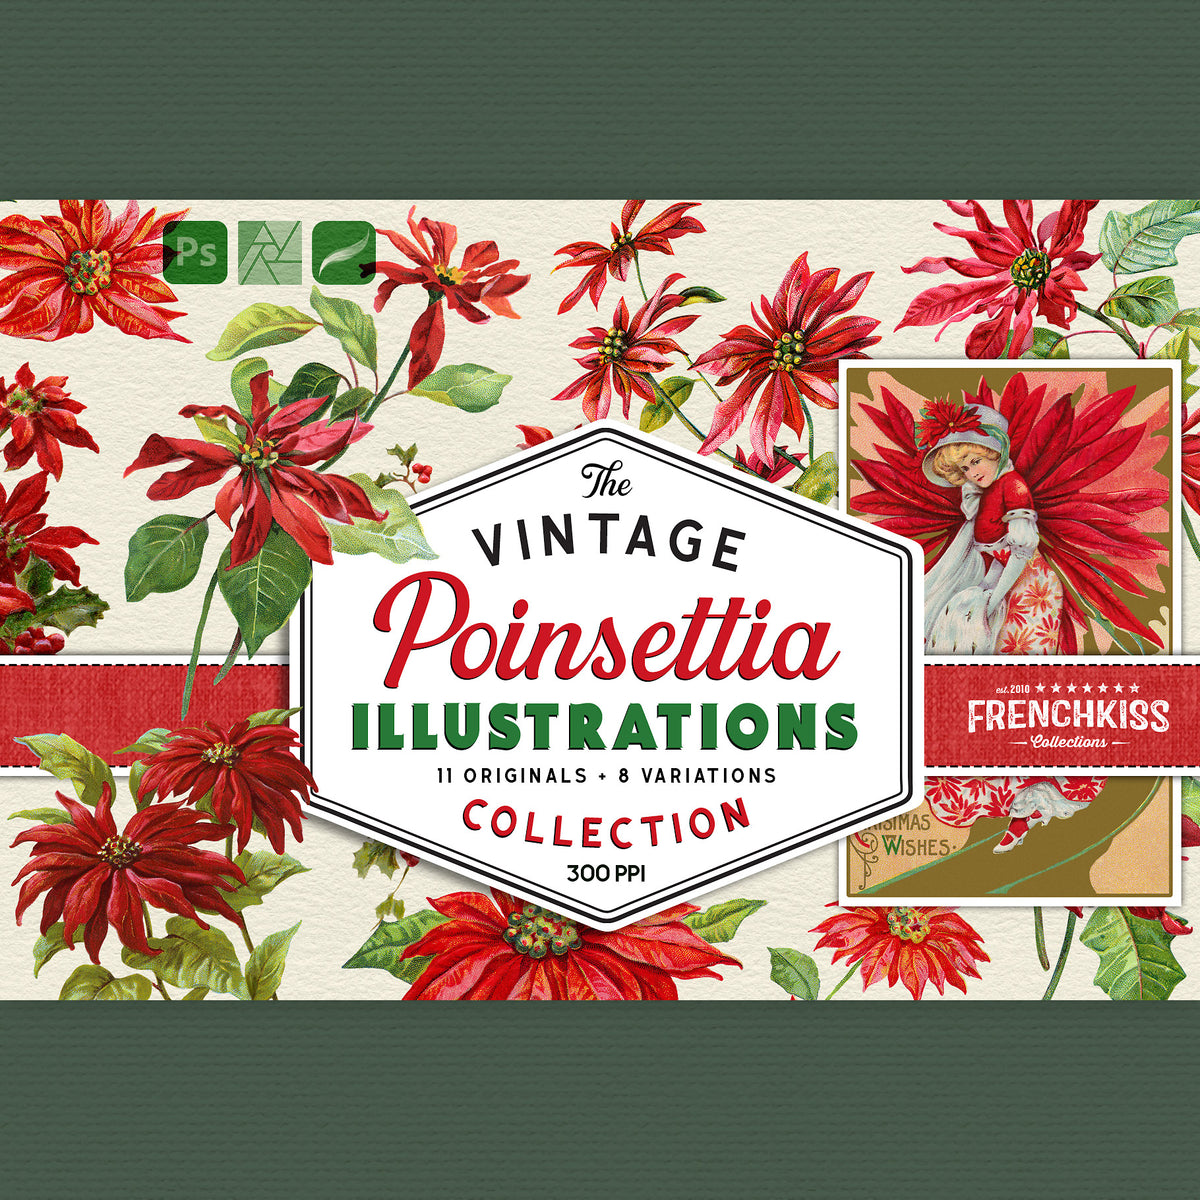 Vintage Poinsettia digital graphics extended license.